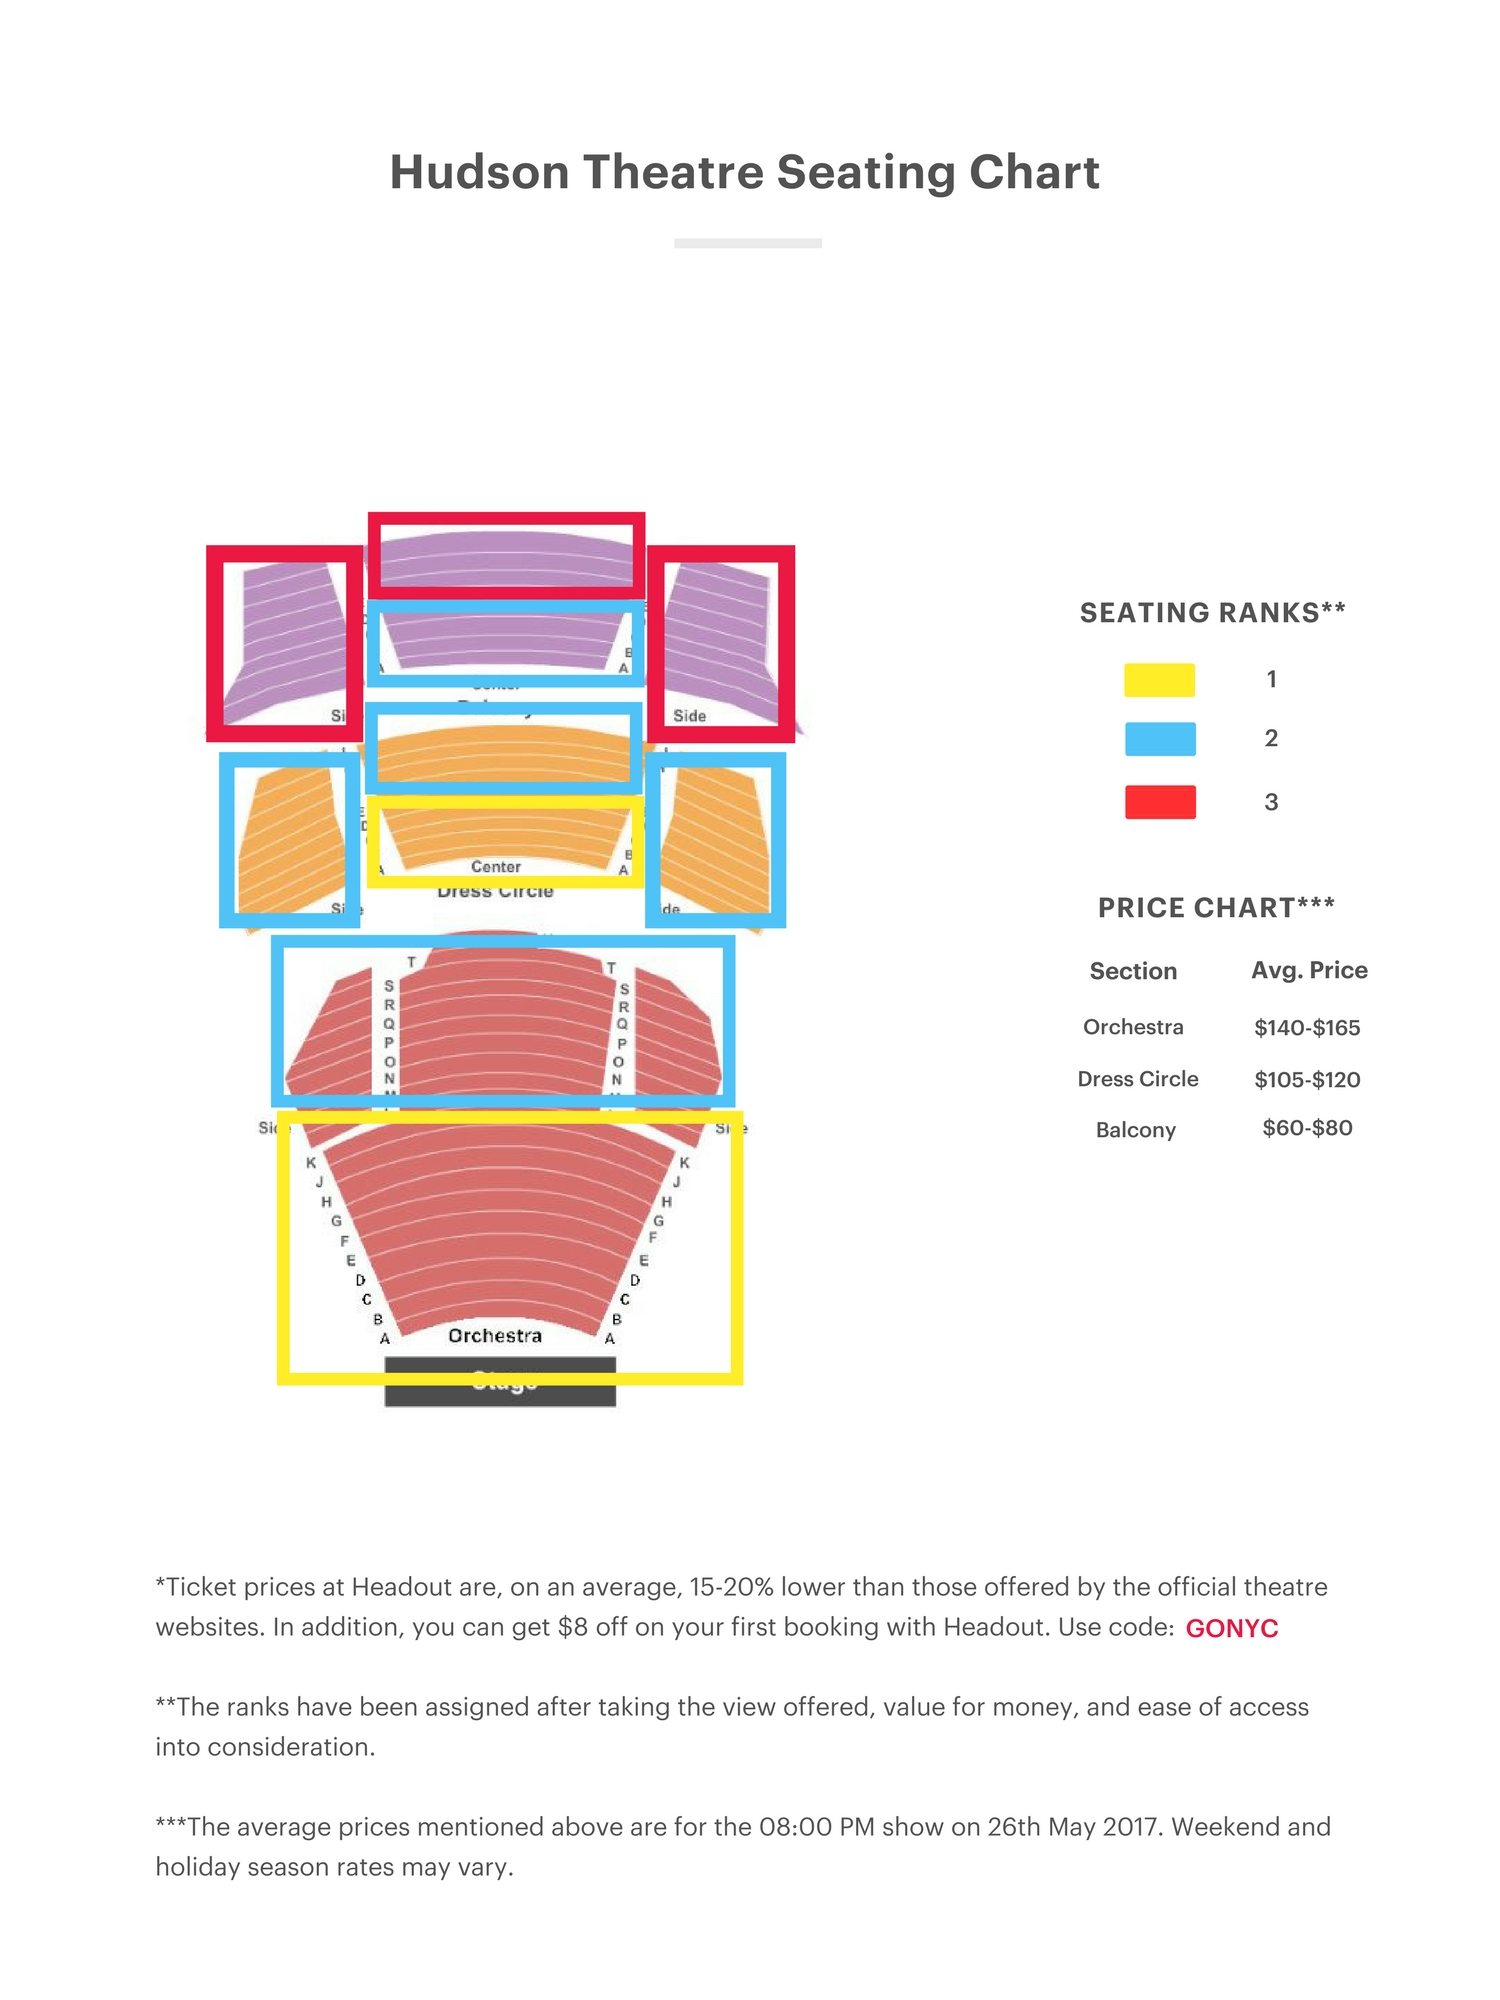 Hudson Theater Seating Chart | Watch 1984 on Broadway